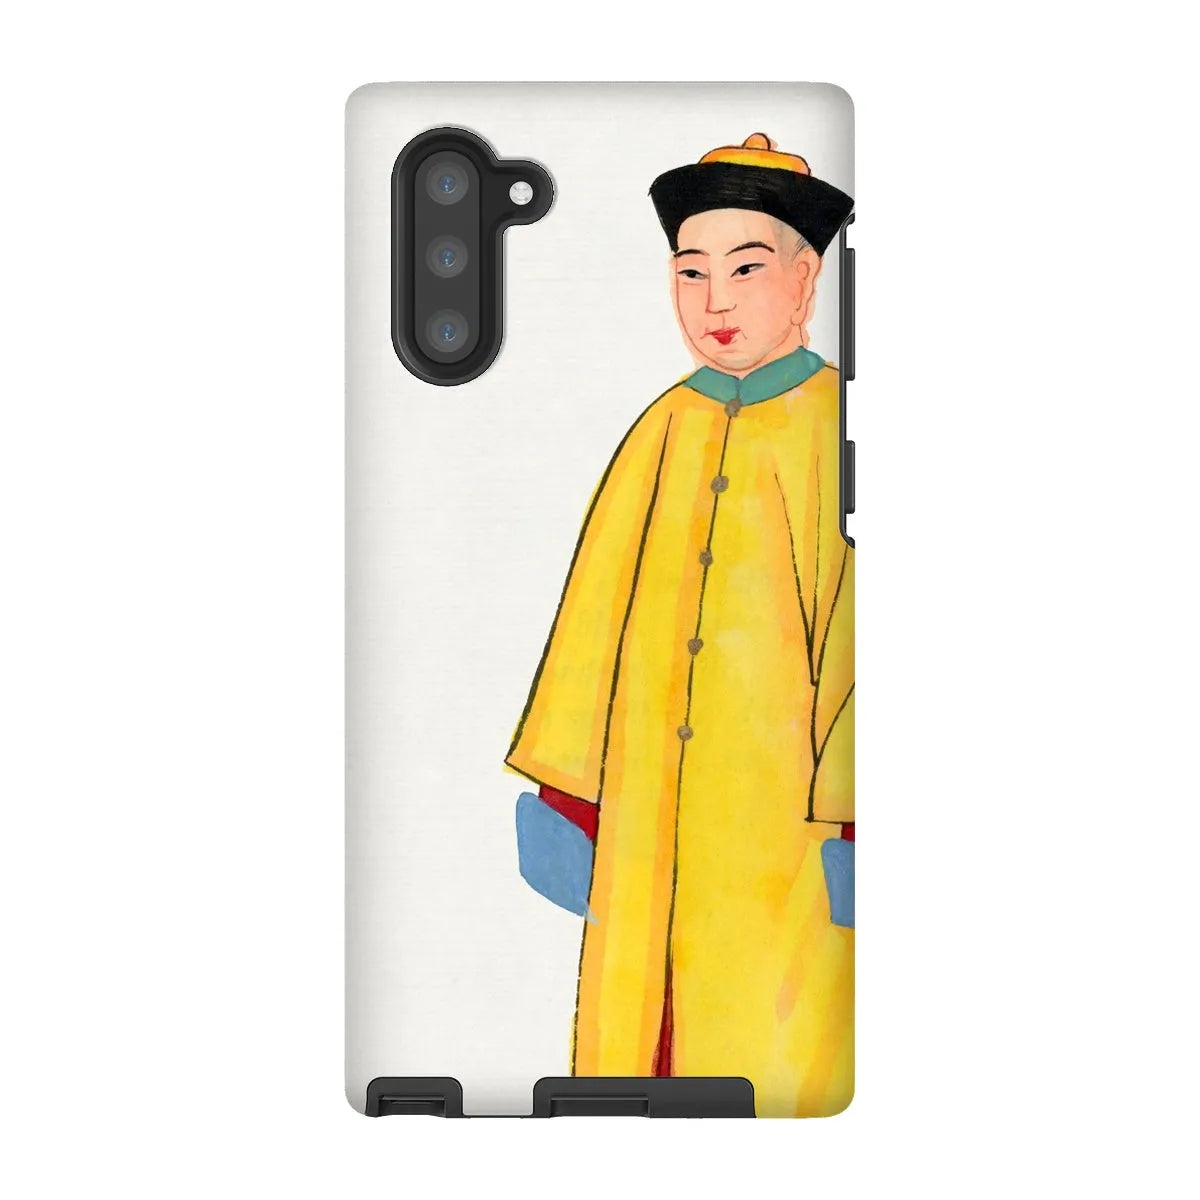 Priest In Yellow Robes - Chinese Aesthetic Art Phone Case - Samsung Galaxy Note 10 / Matte - Mobile Phone Cases